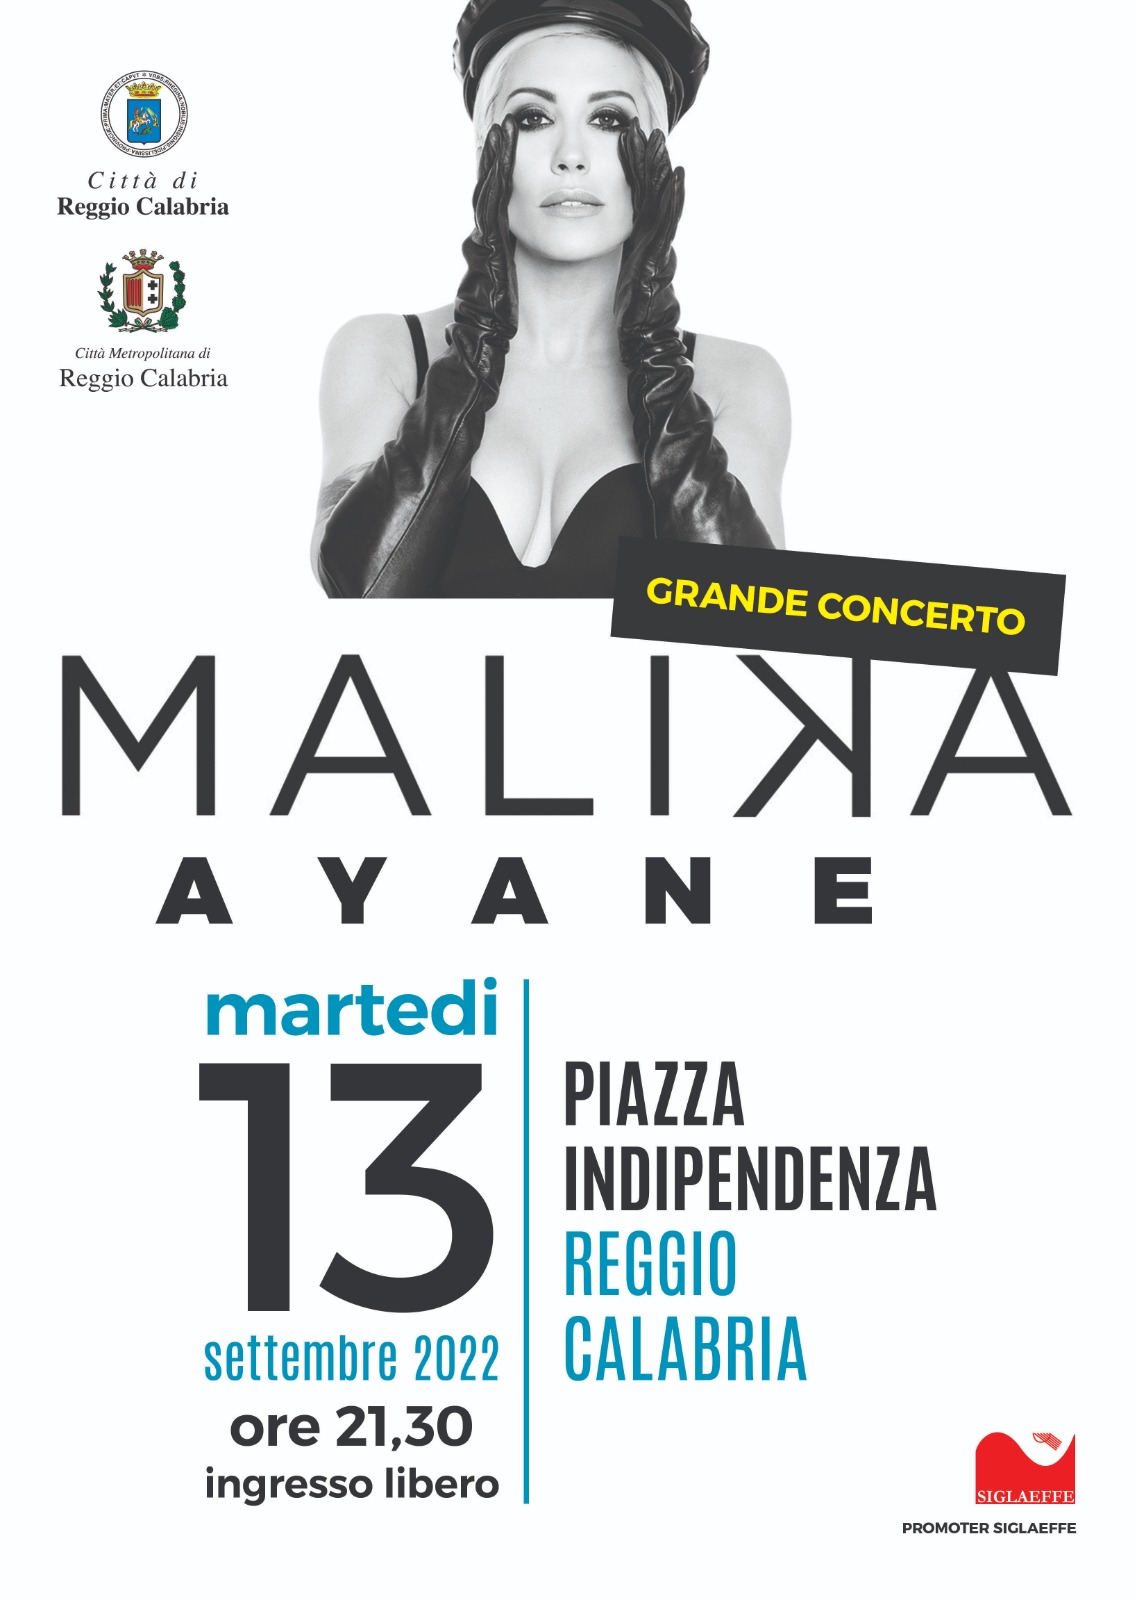 Malika Ayane in concerto a Piazza Indipendenza